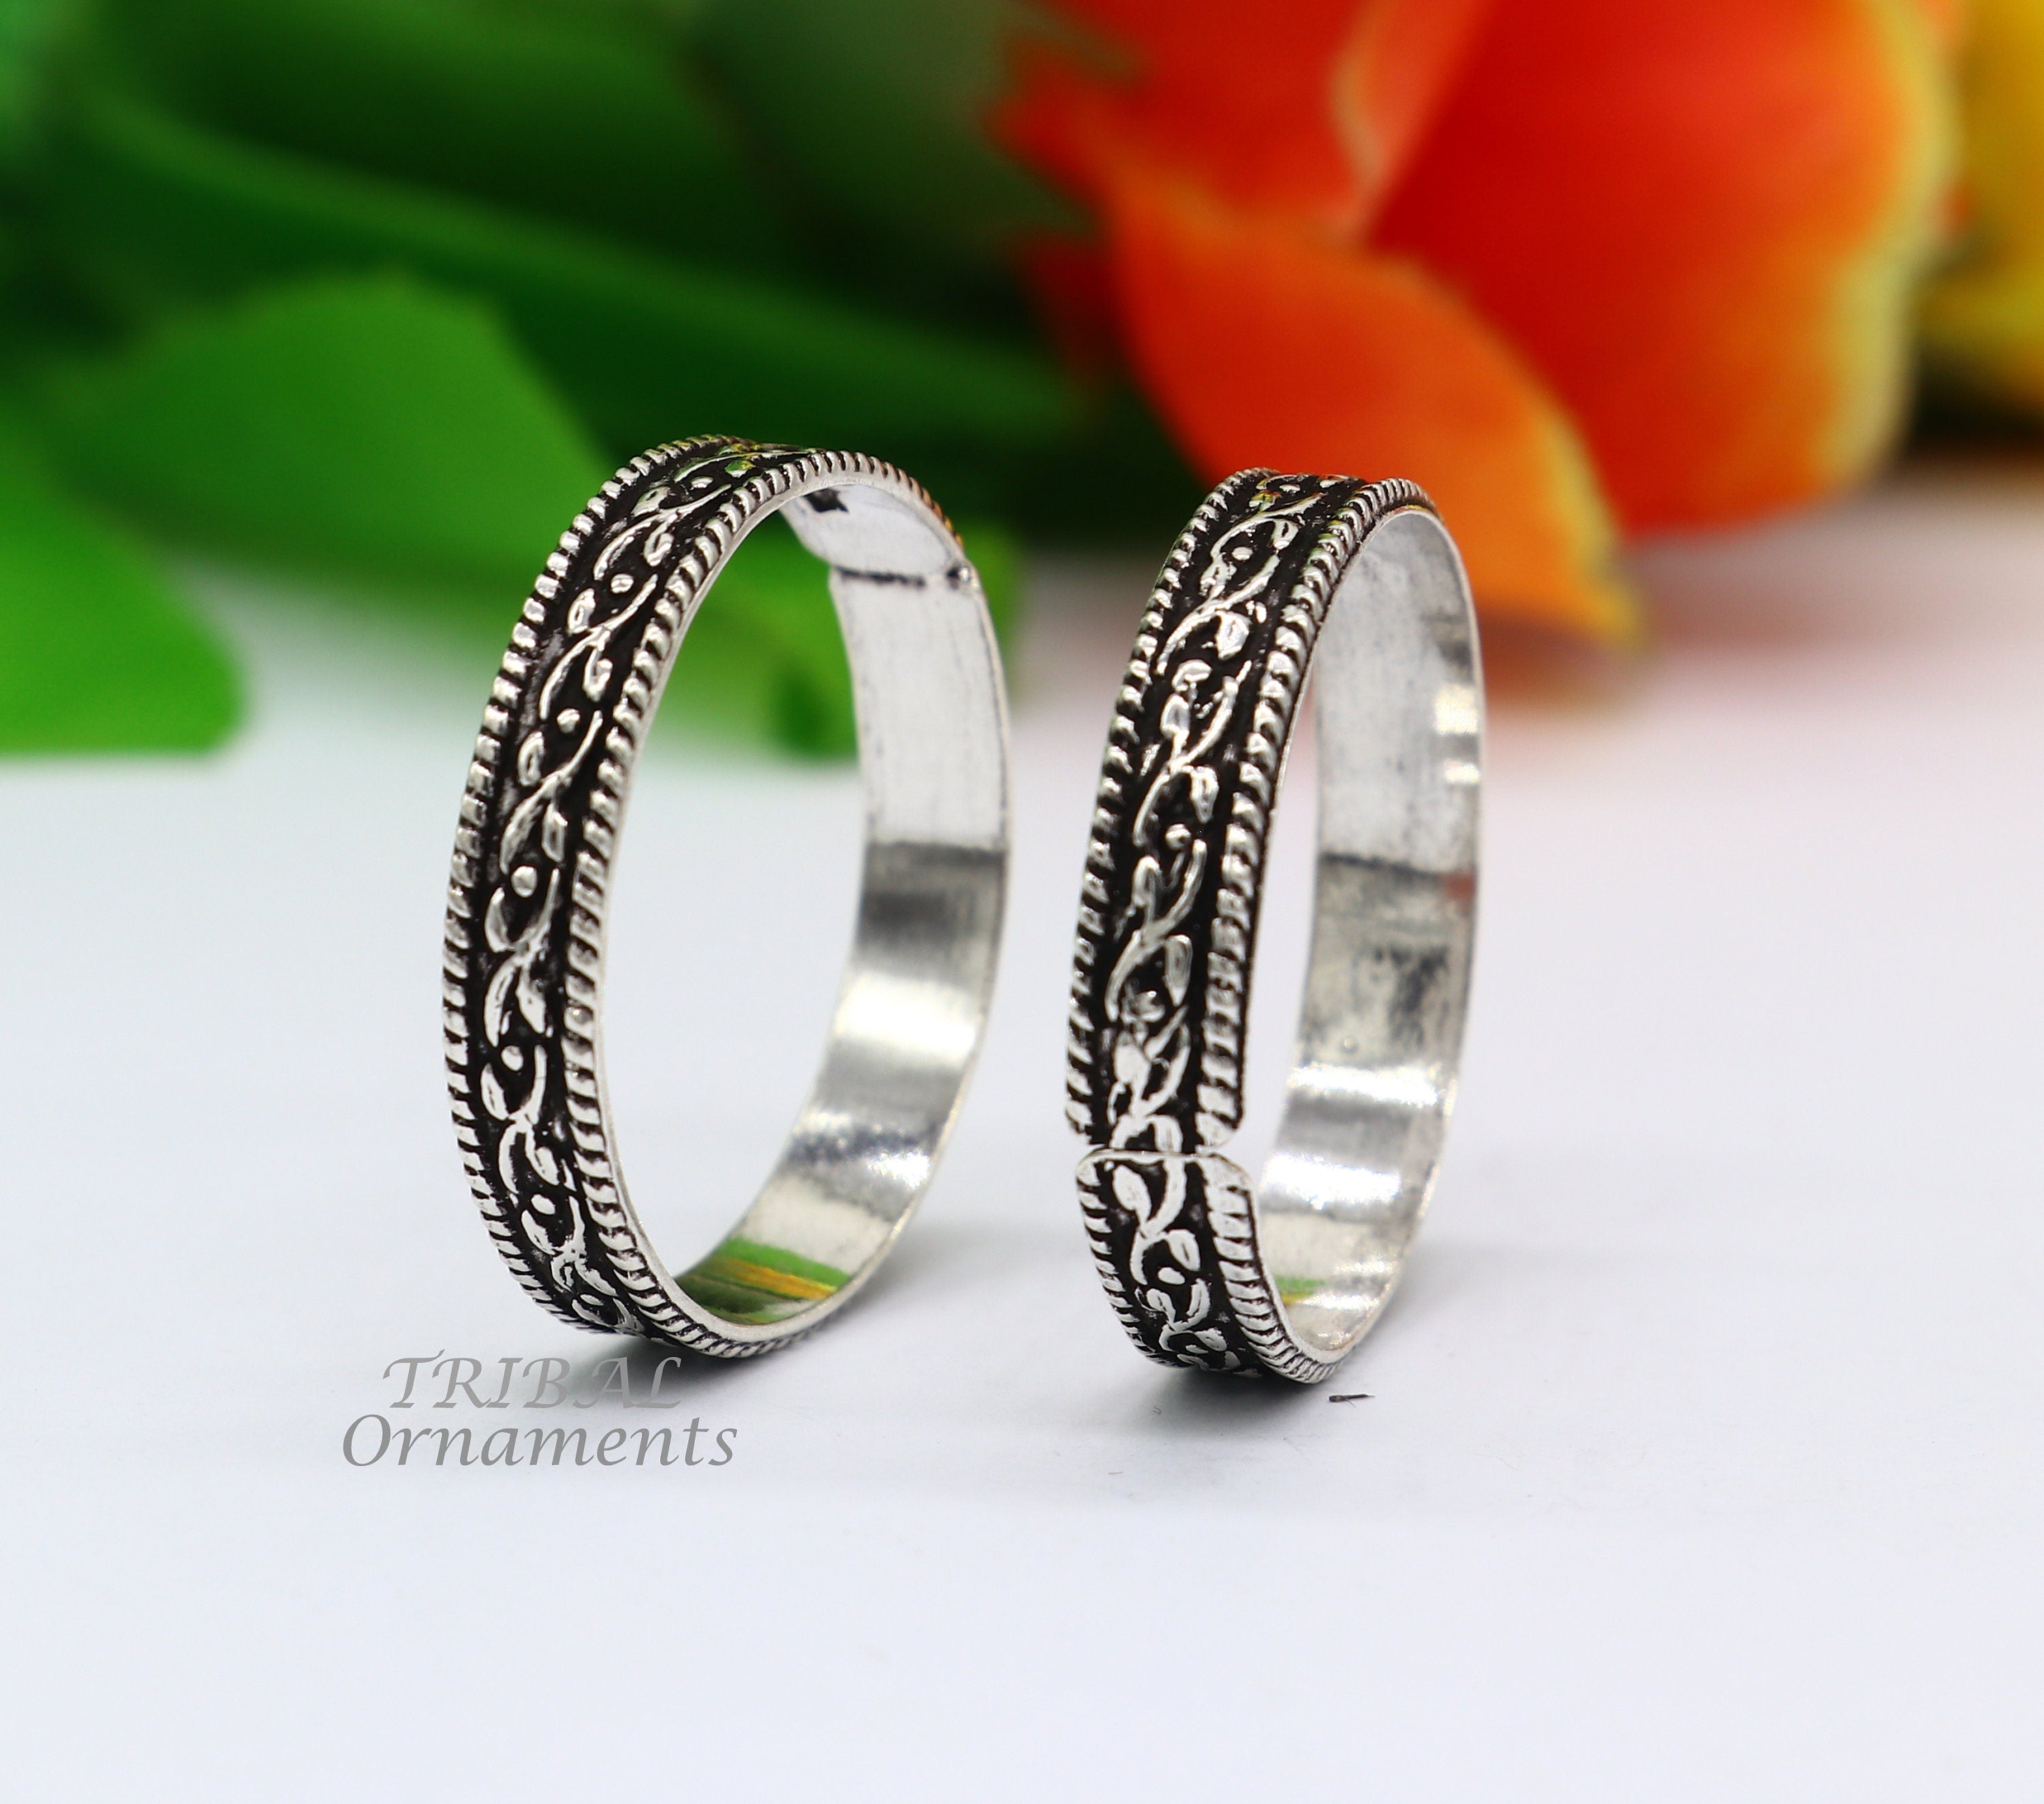 Lumen Stylish Silver Hug Ring for Women Girl and Mens Finger and Thumb Ring  at best price in New Delhi